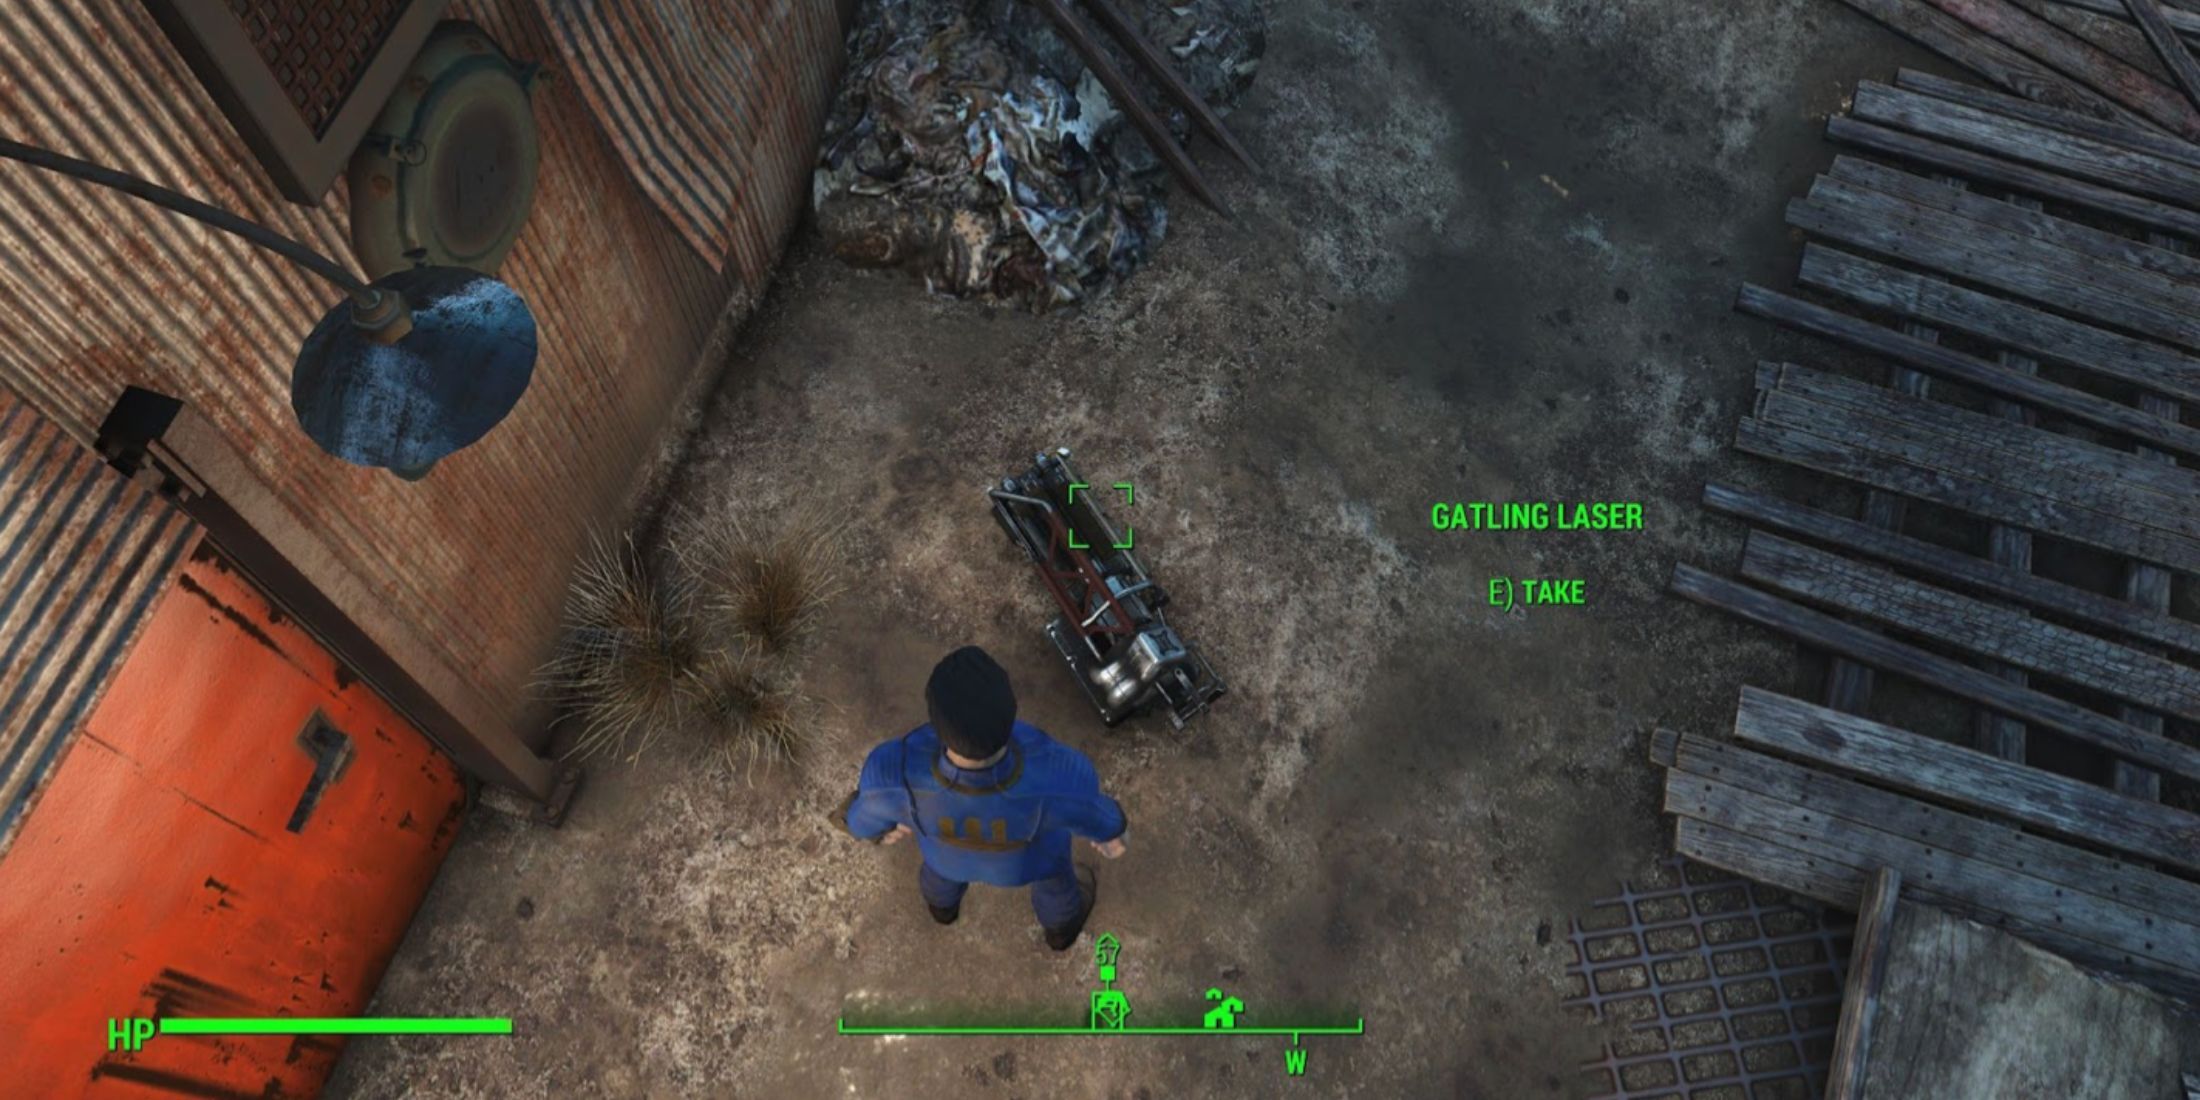 The Sole Survivor finds a Gatling Laser in Fallout 4